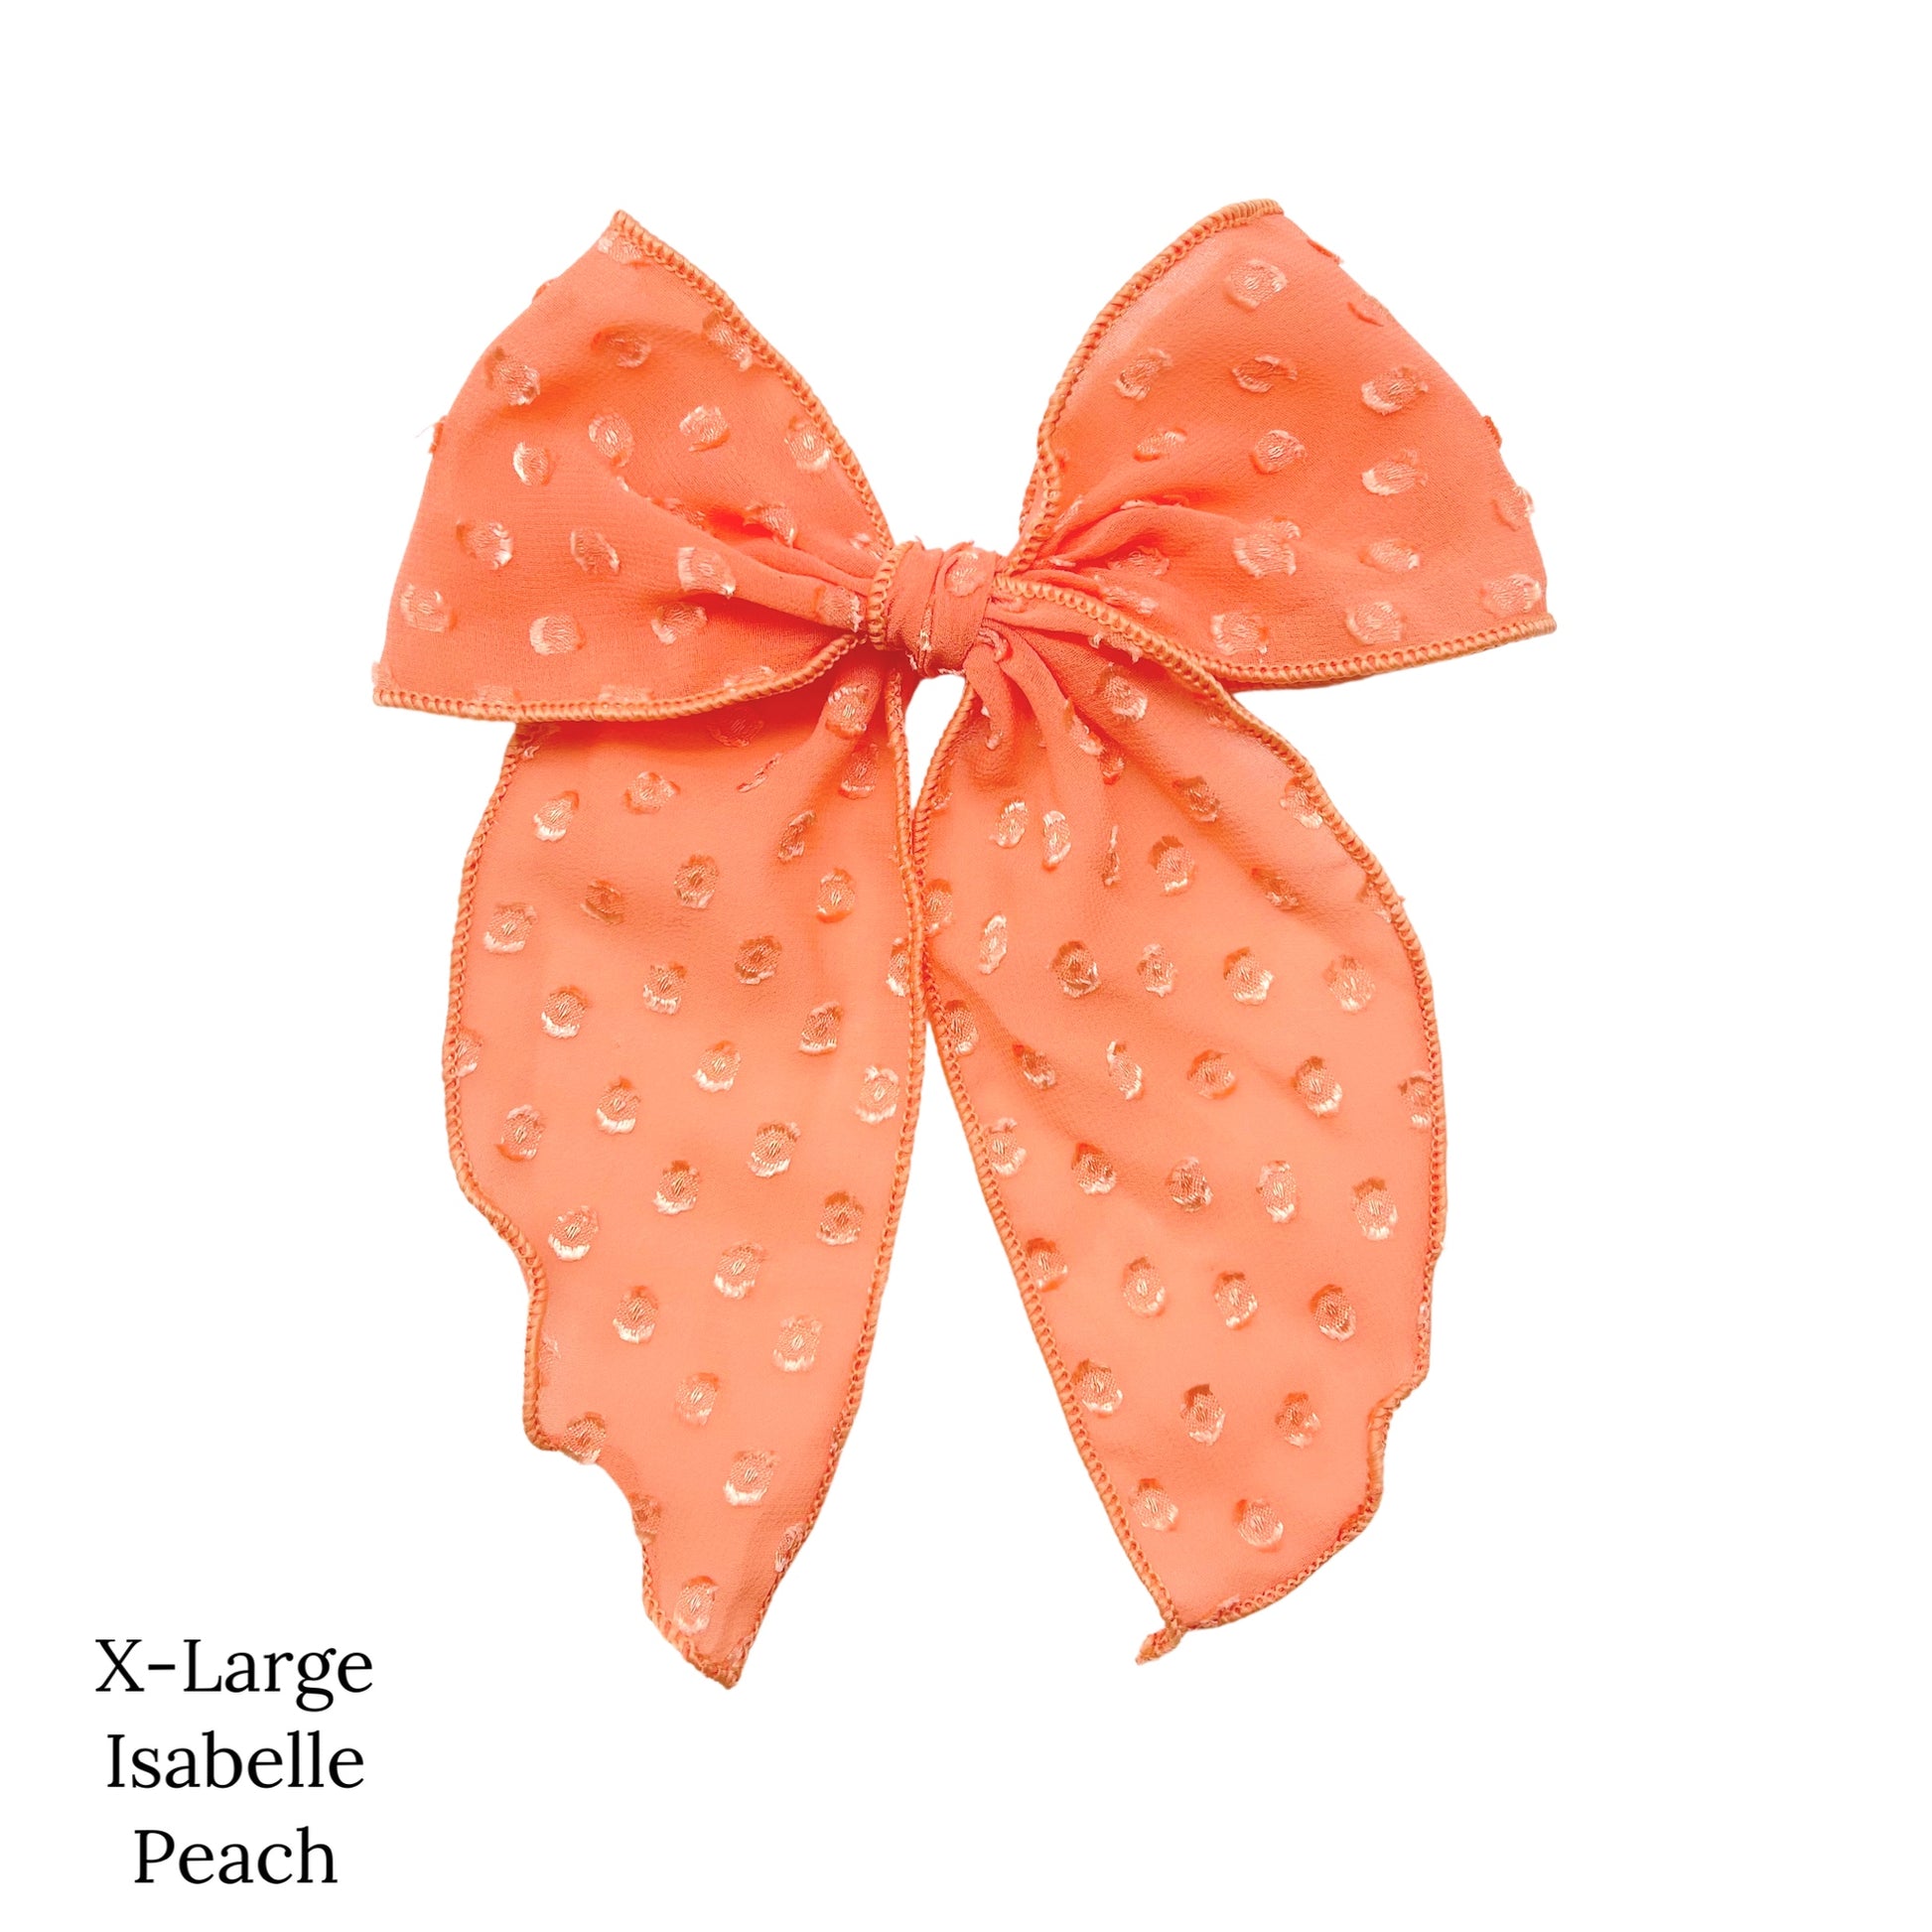 Spring frayed dot fabric bow strips. Peach colored X-large serger style bow strip.